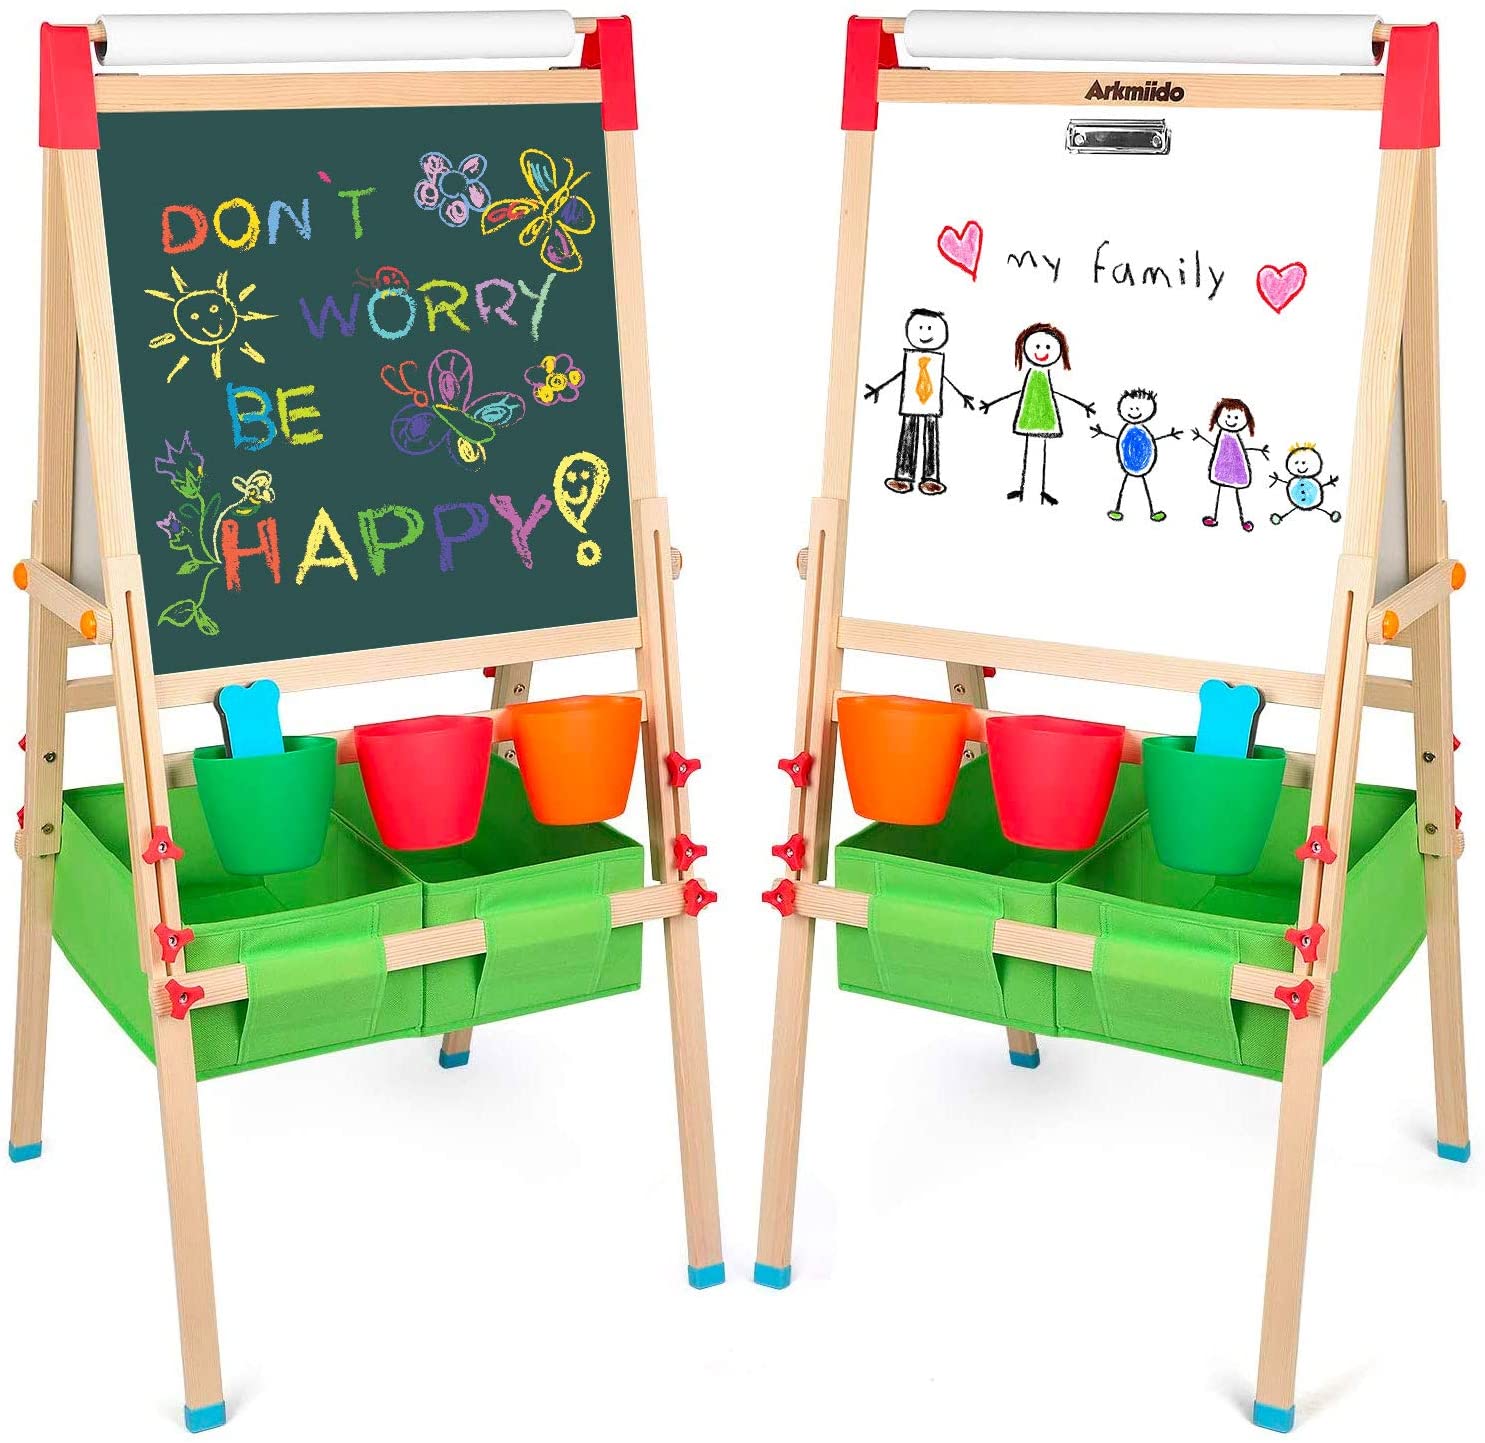 Arkmiido Kids Easel with Paper Roll Double-Sided Whiteboard & Chalkboard Standing Easel with Numbers and Other Accessories for Kids and Toddlers (Green) Featured Image